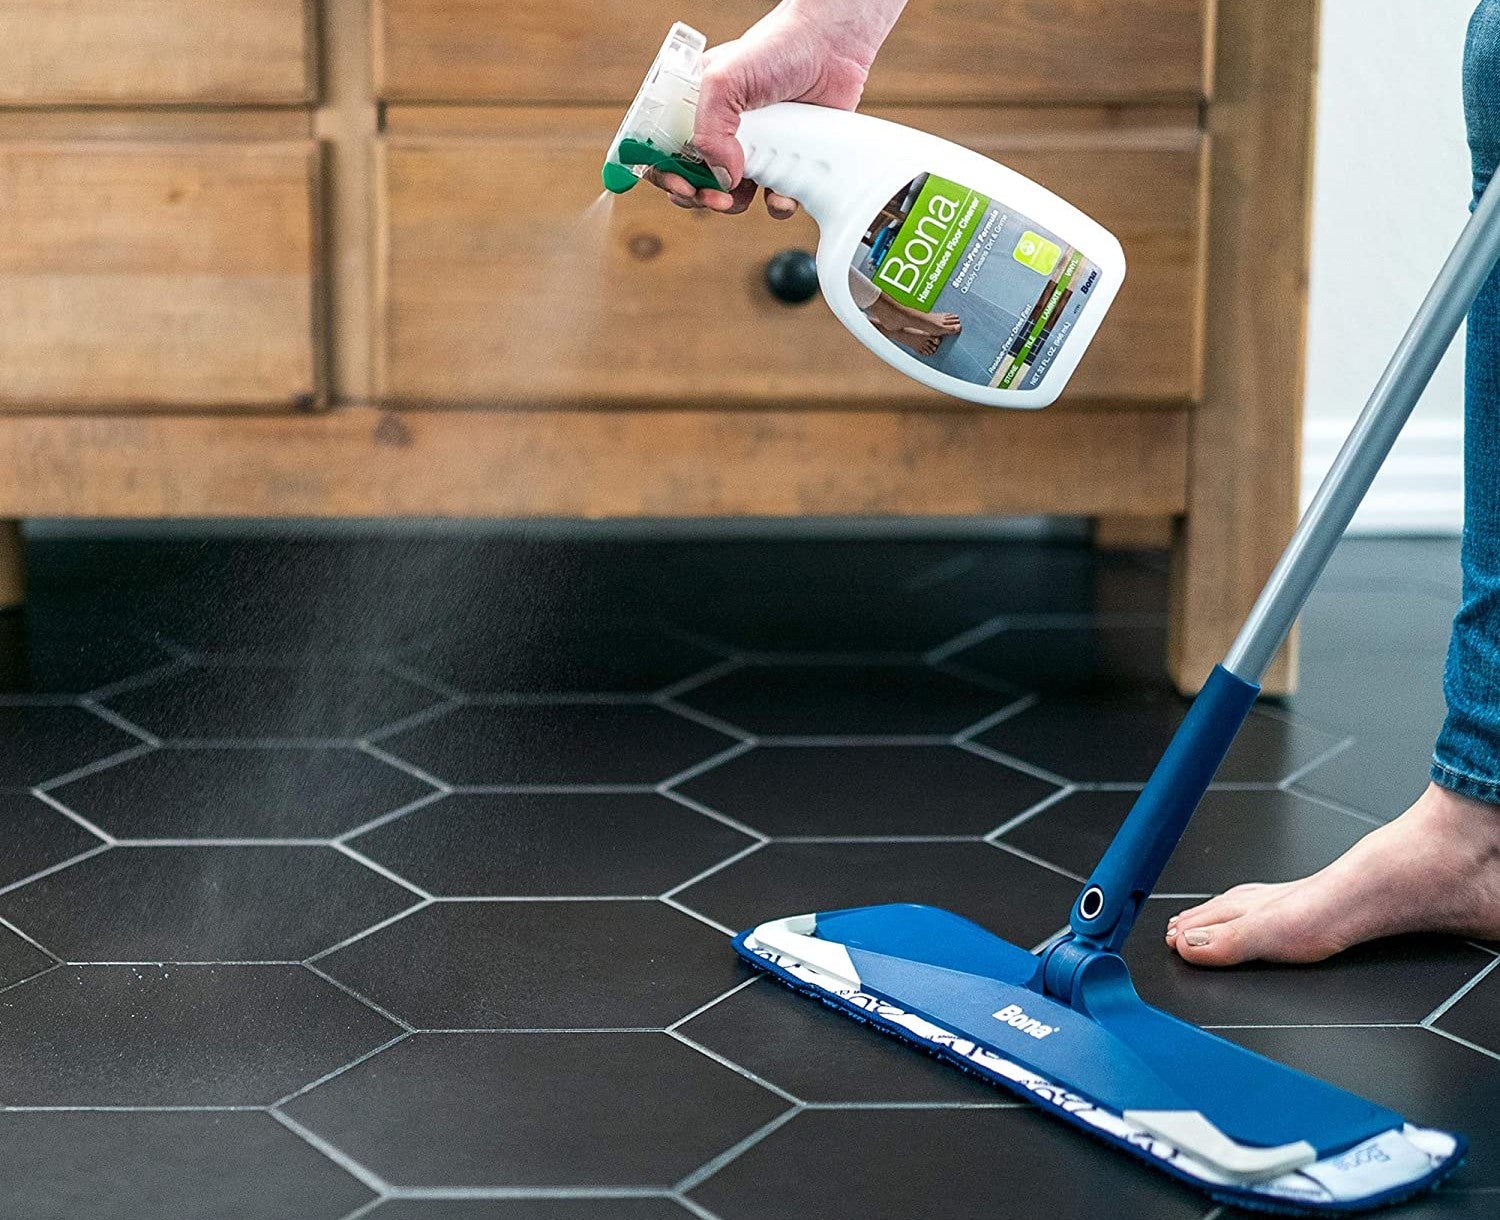 The Best Laminate Floor Cleaner Options for Spills and Stains - Bob Vila